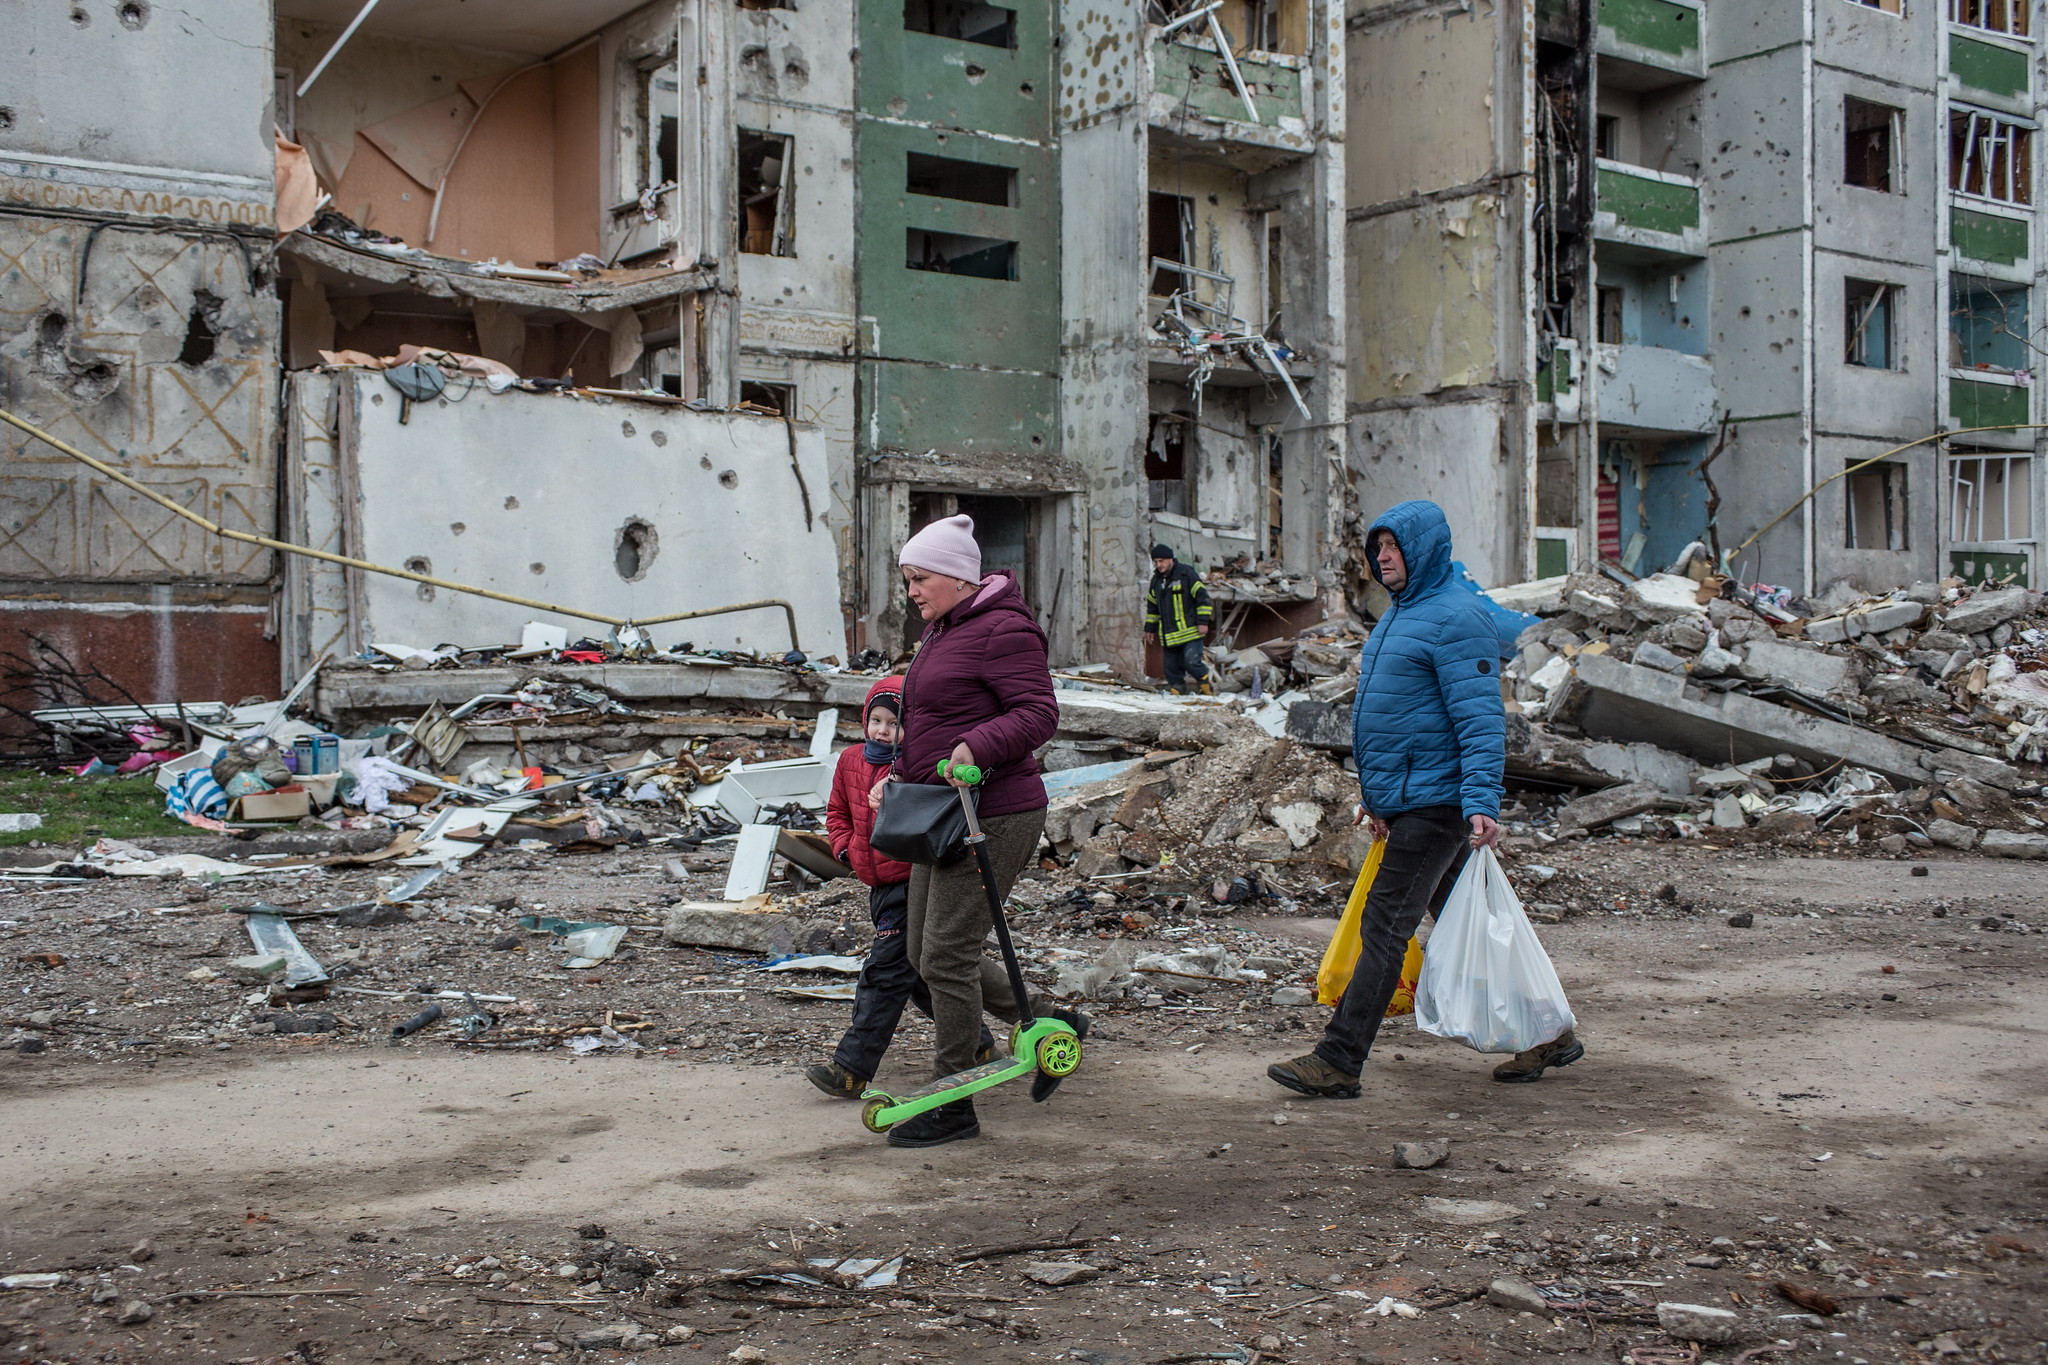 A family walks down a street with damaged buildings in the background.